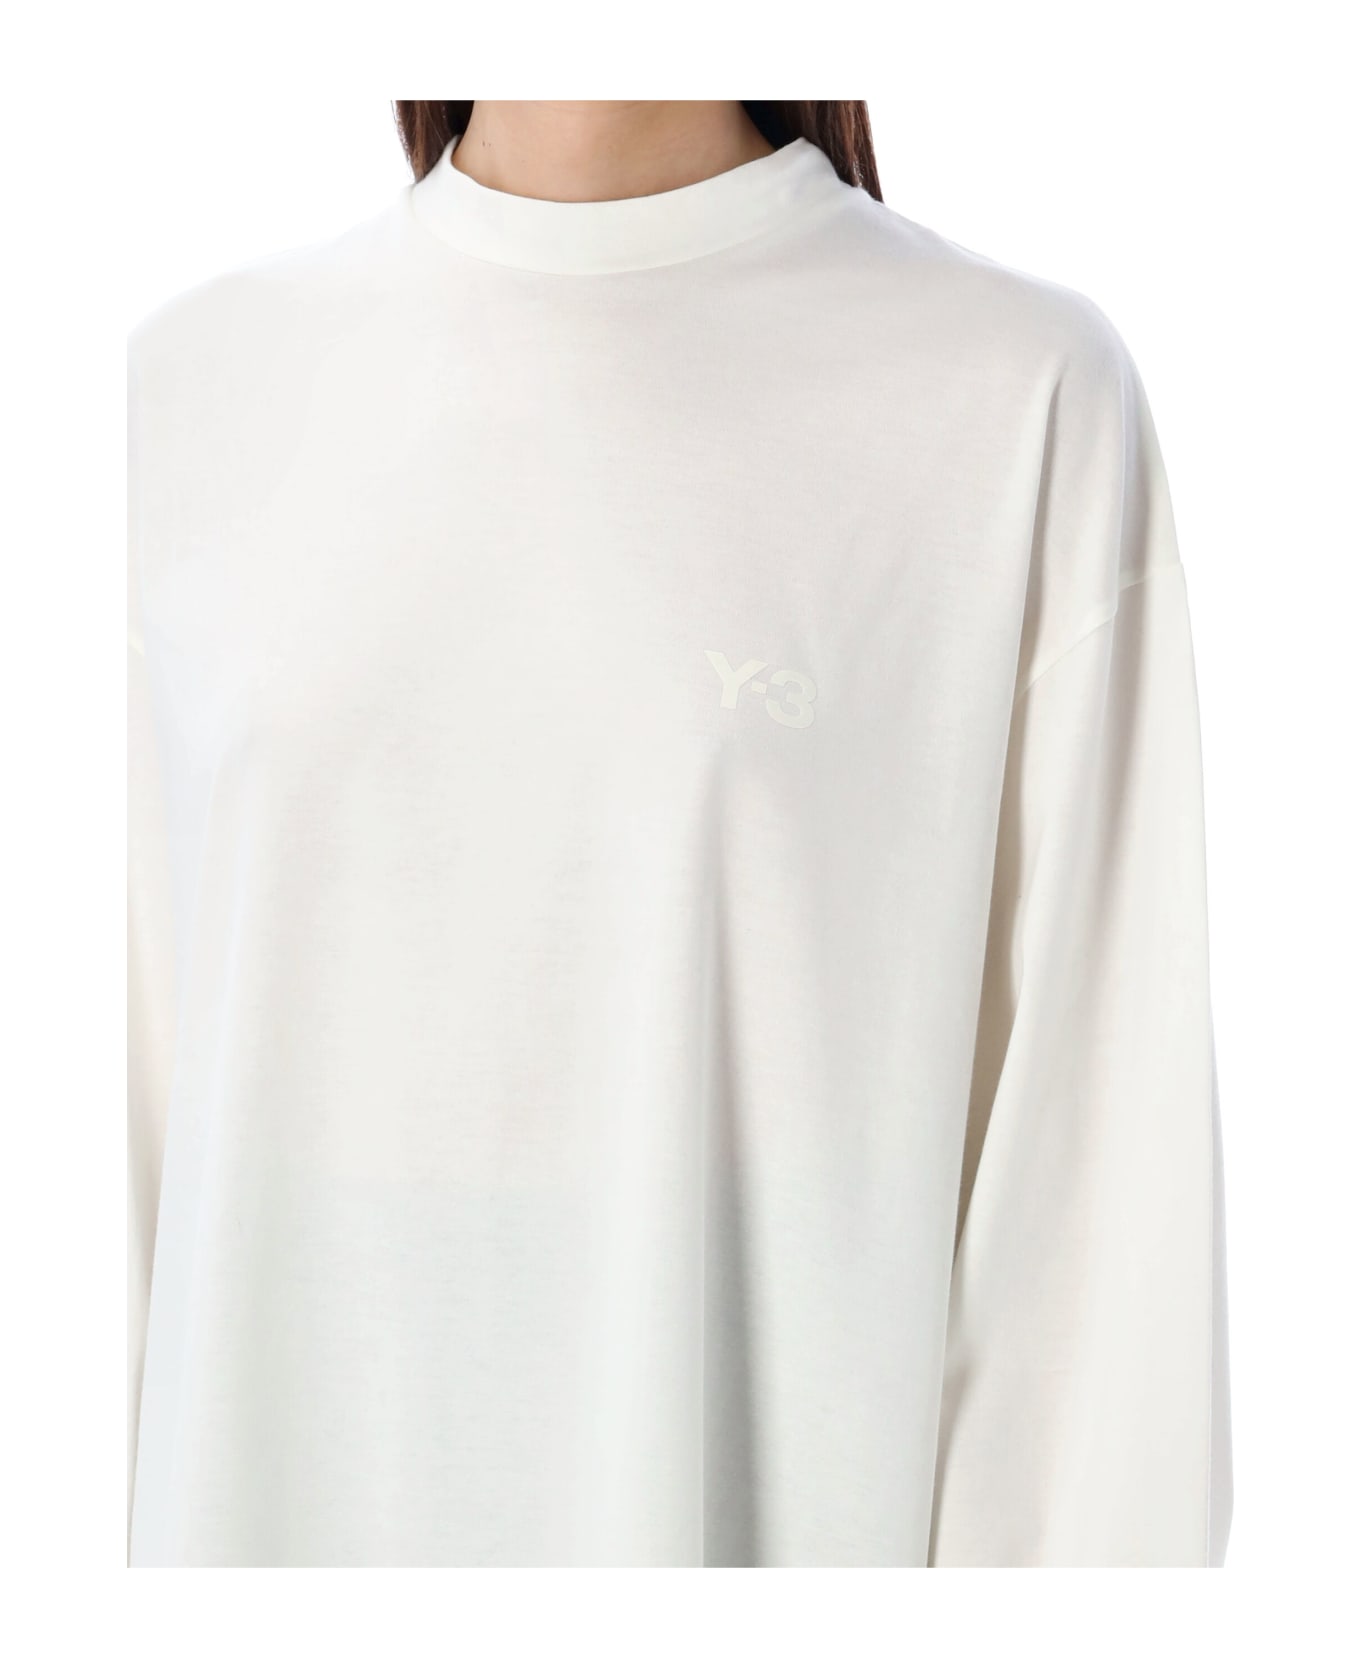 Y-3 Mock Neck Long Sleeves T-shirt - WHITE